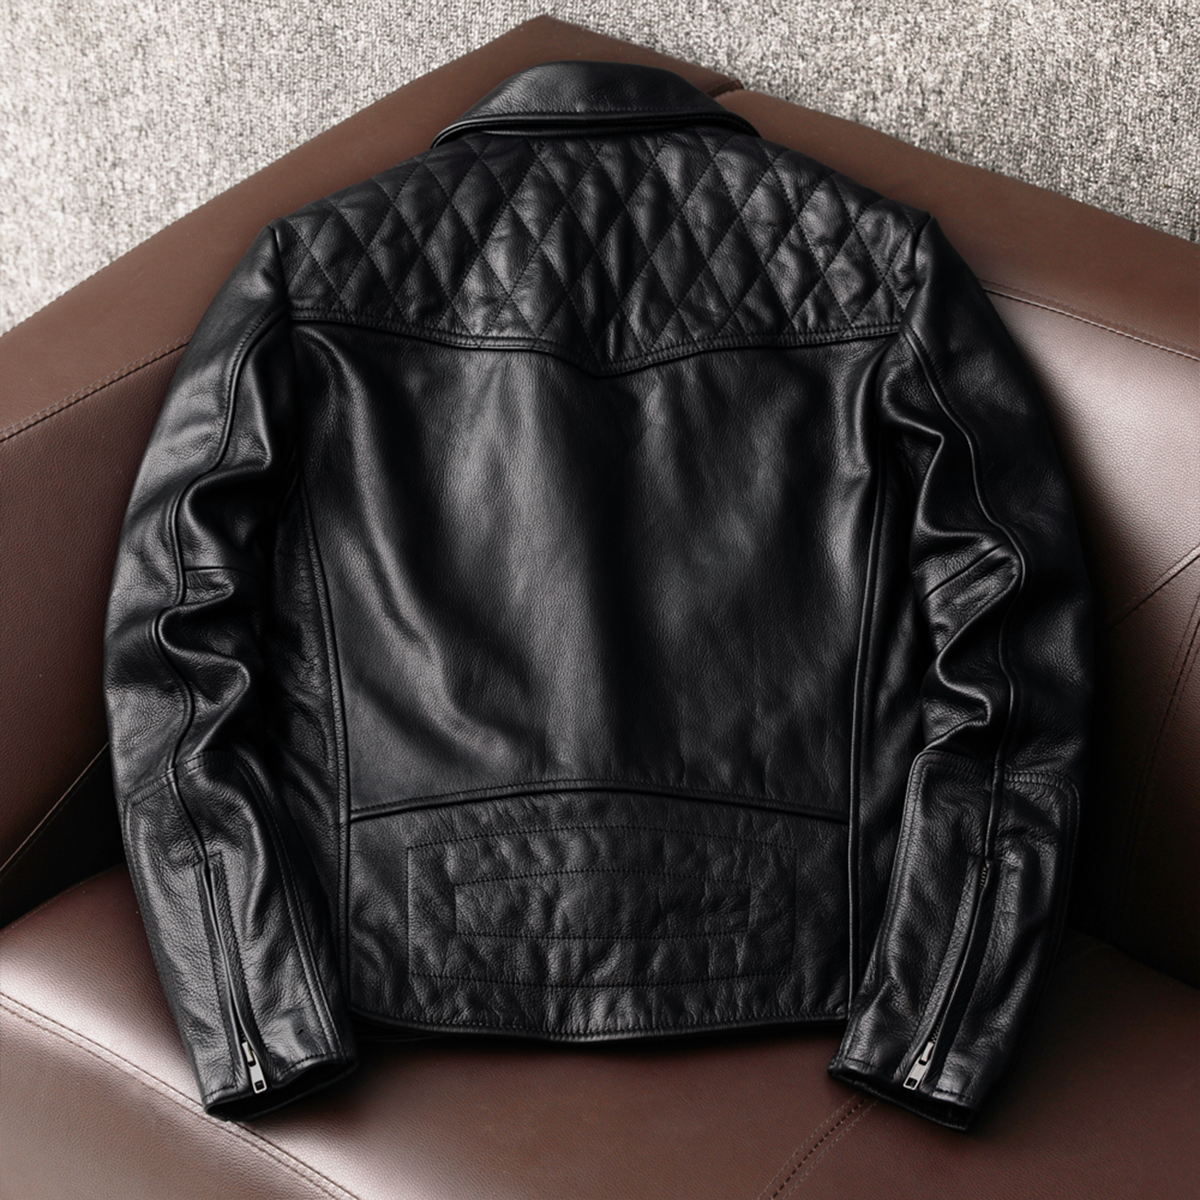 Men's Black Leather Armour Available Motorcycle Biker Jacket